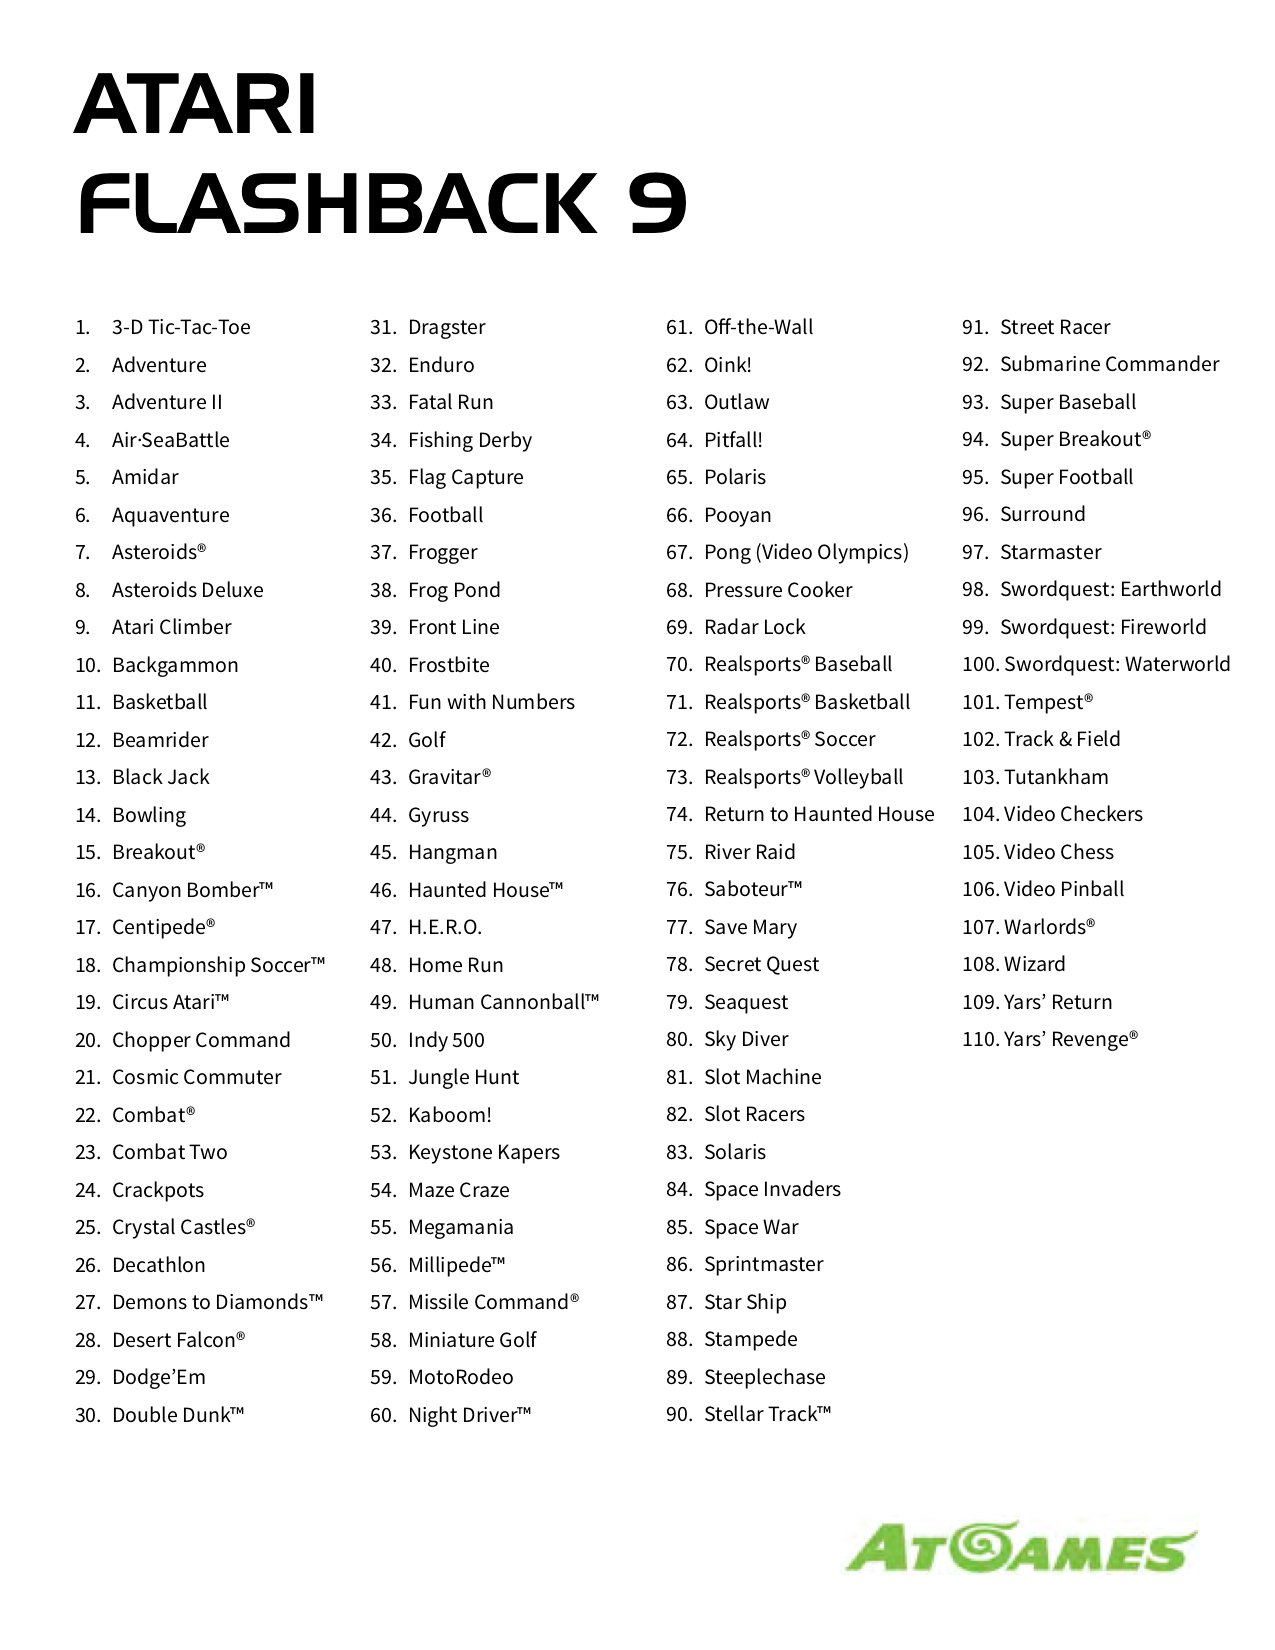 game list for the Atari Flashback 9 gaming system